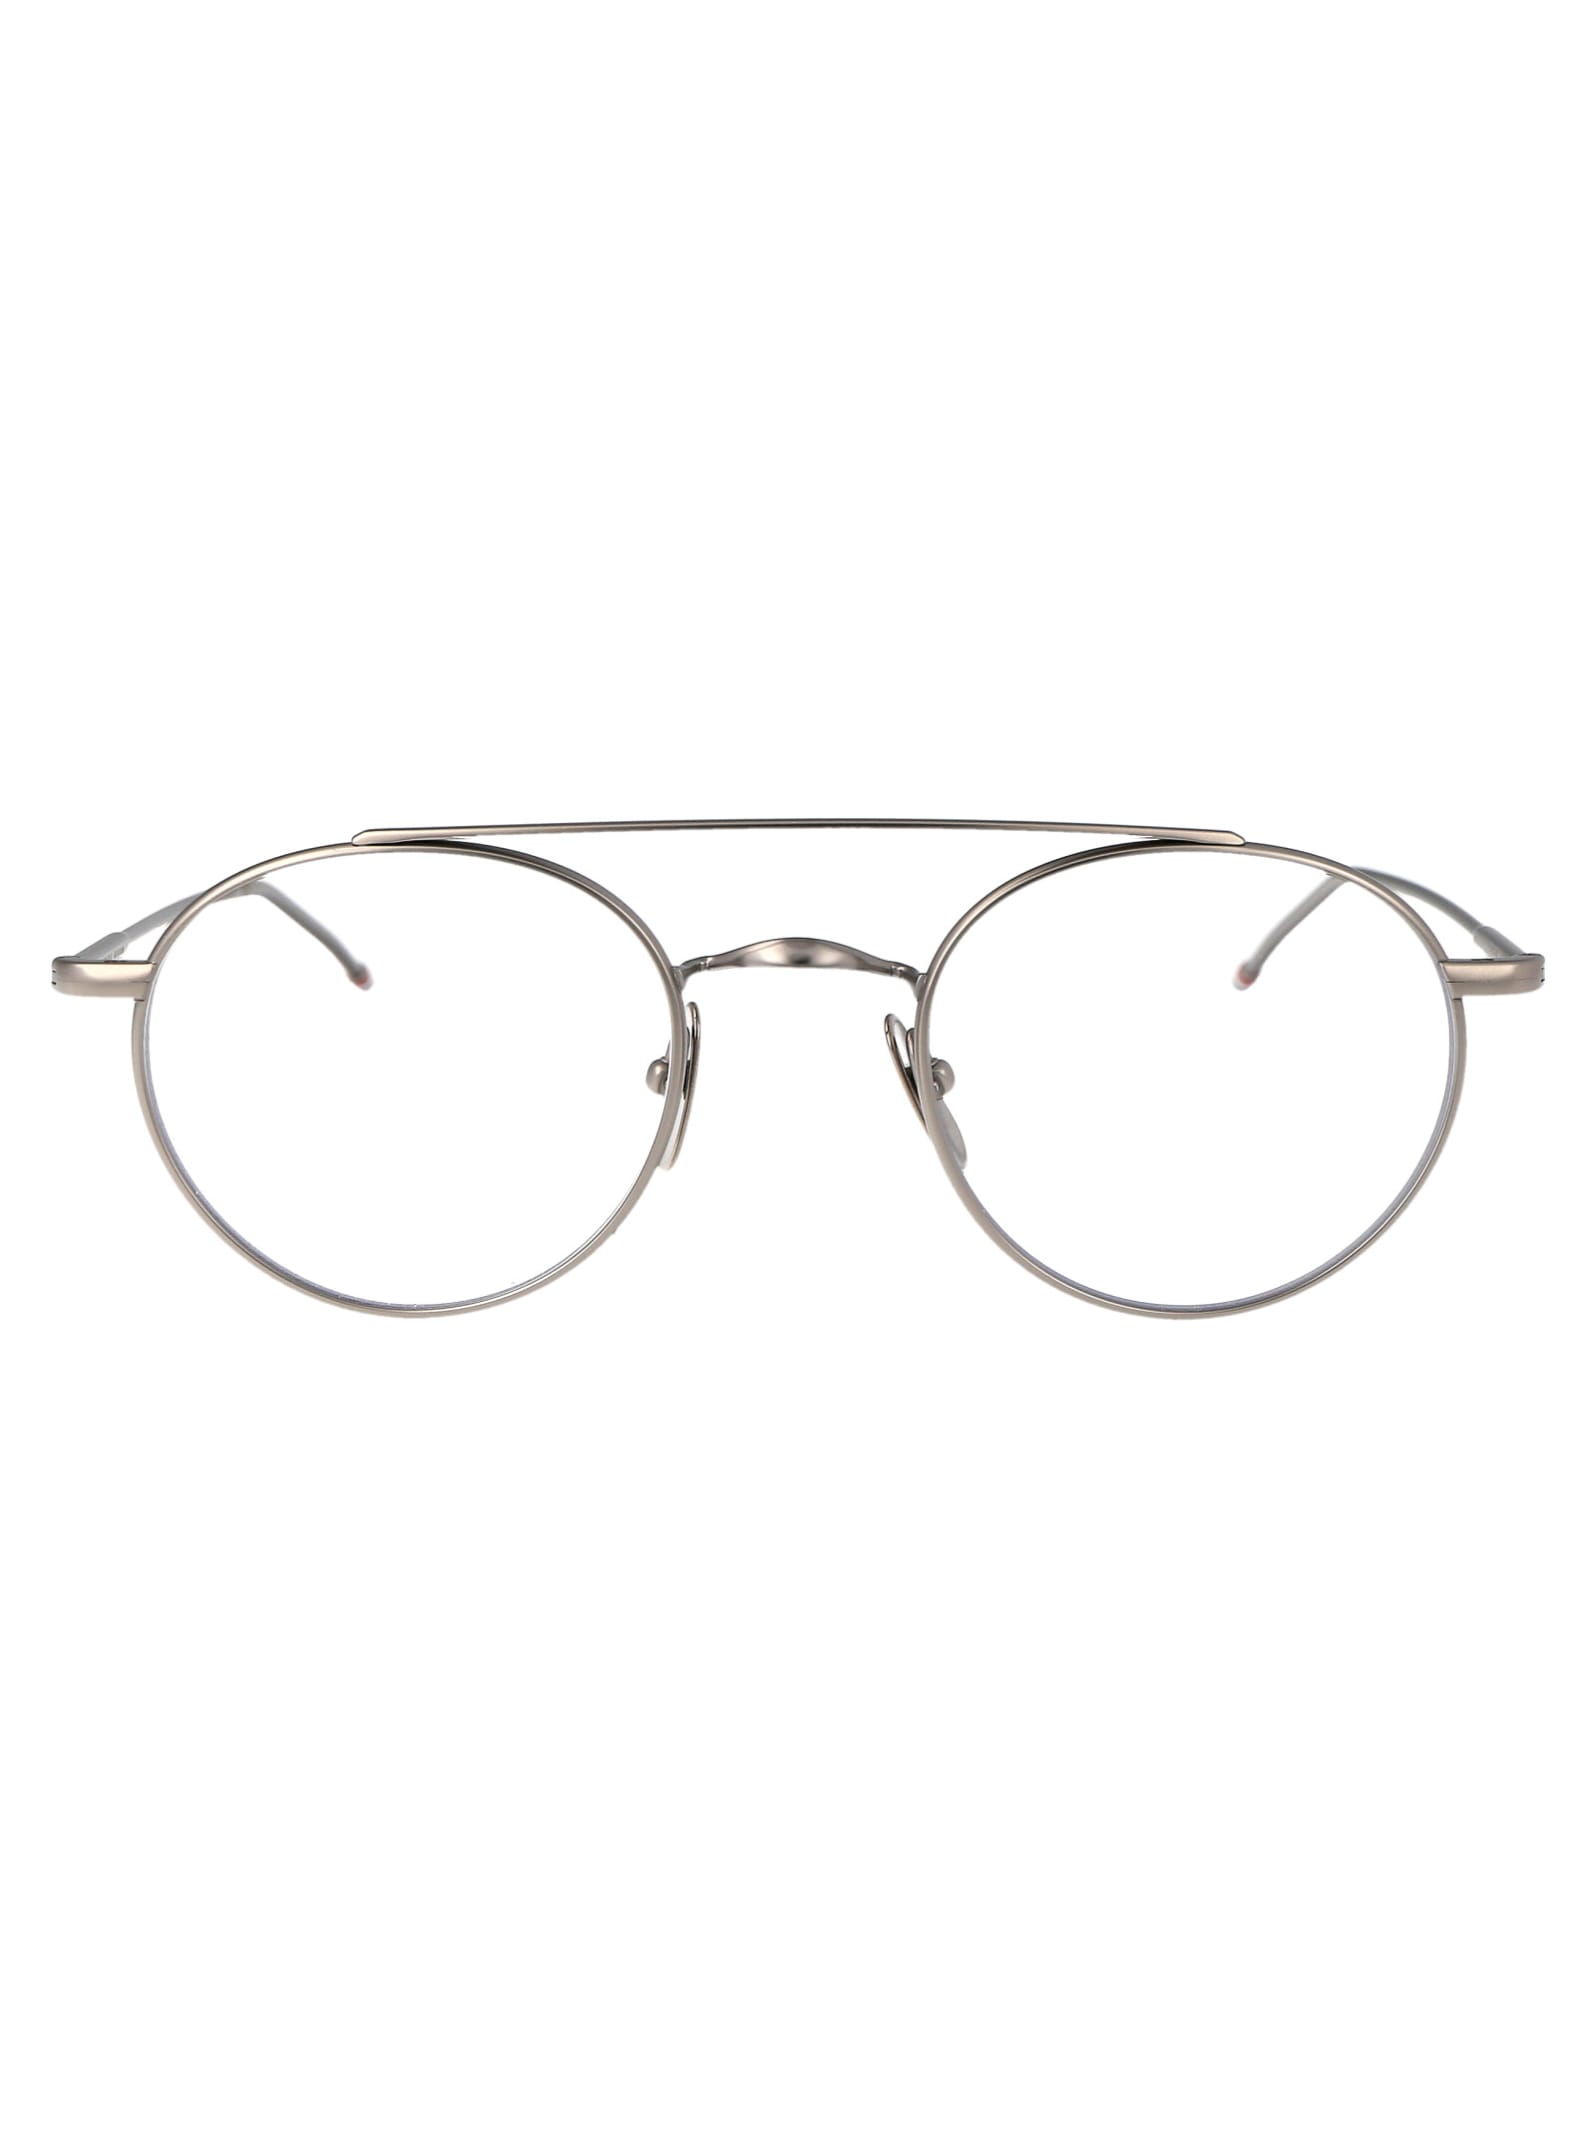 Thom Browne Ueo101a-g0001-035-49 Glasses In 035 Med